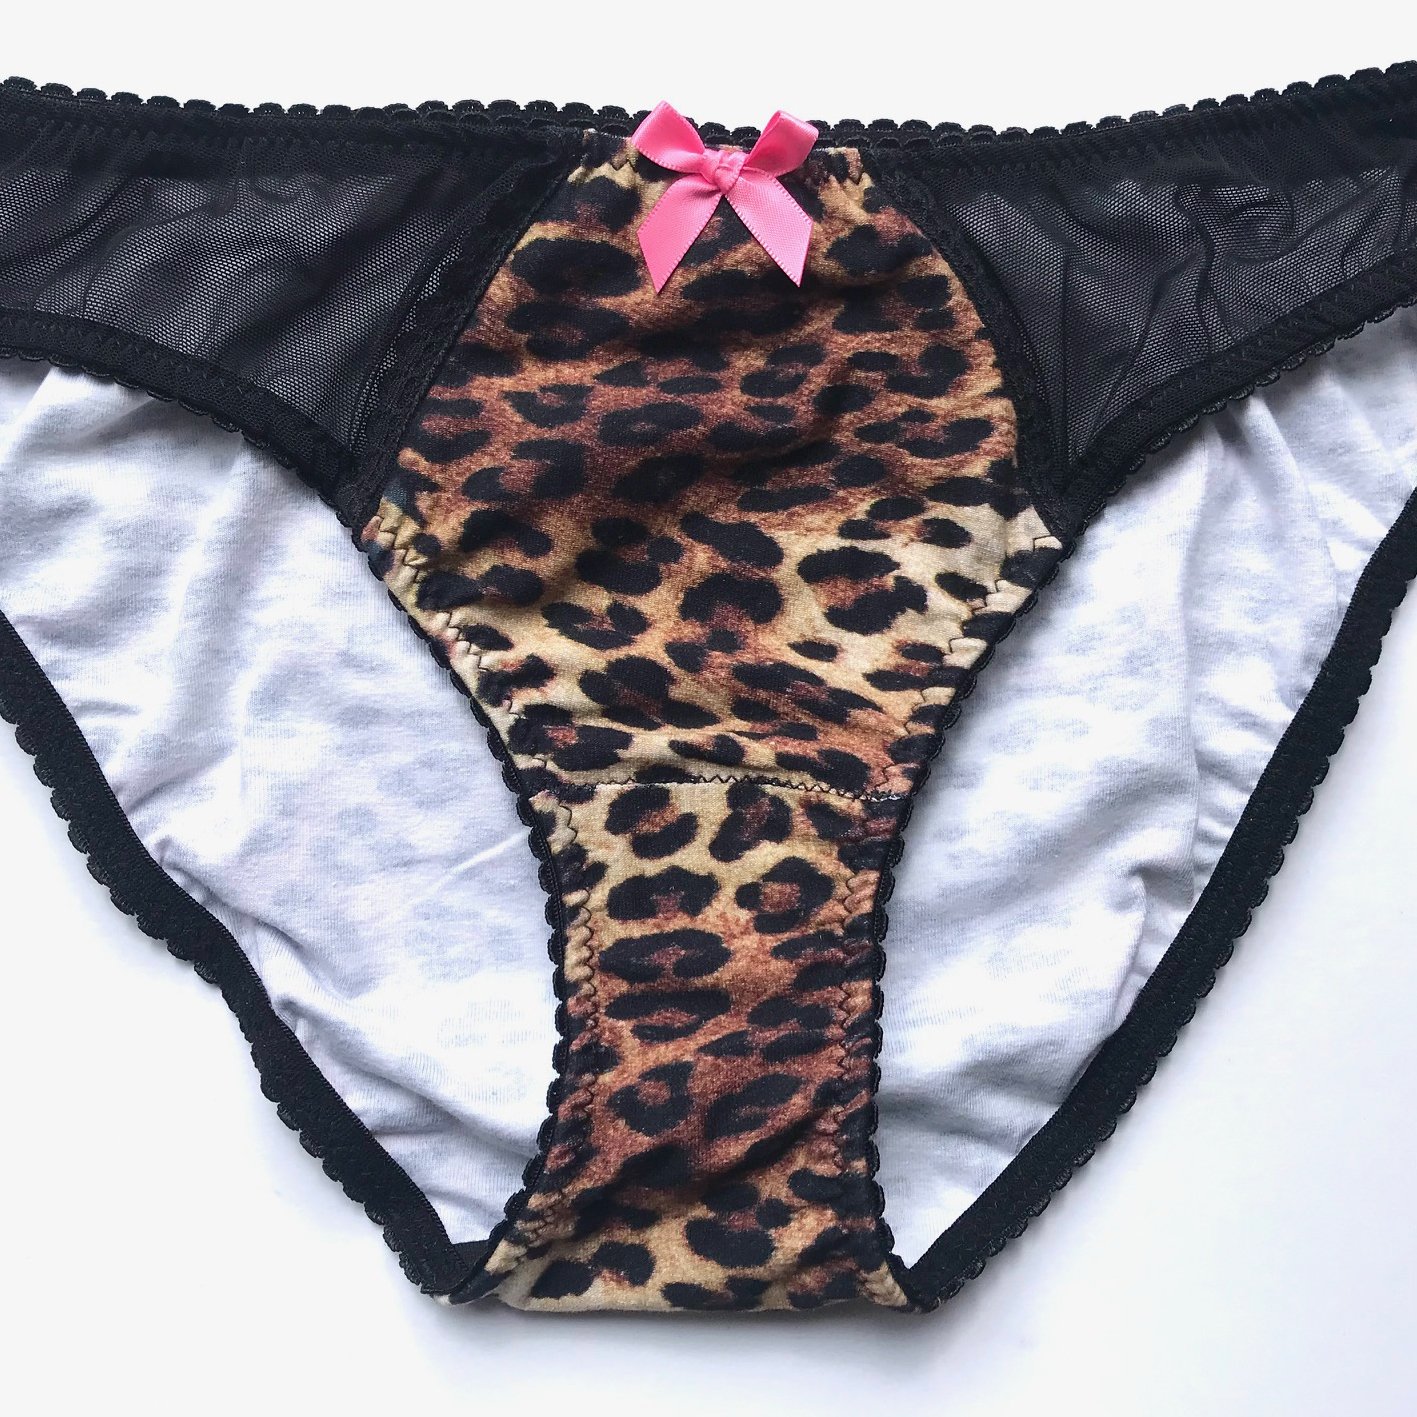 Pocket Panties - Leopard Print | Hid-In Classic Shop - variety of ...